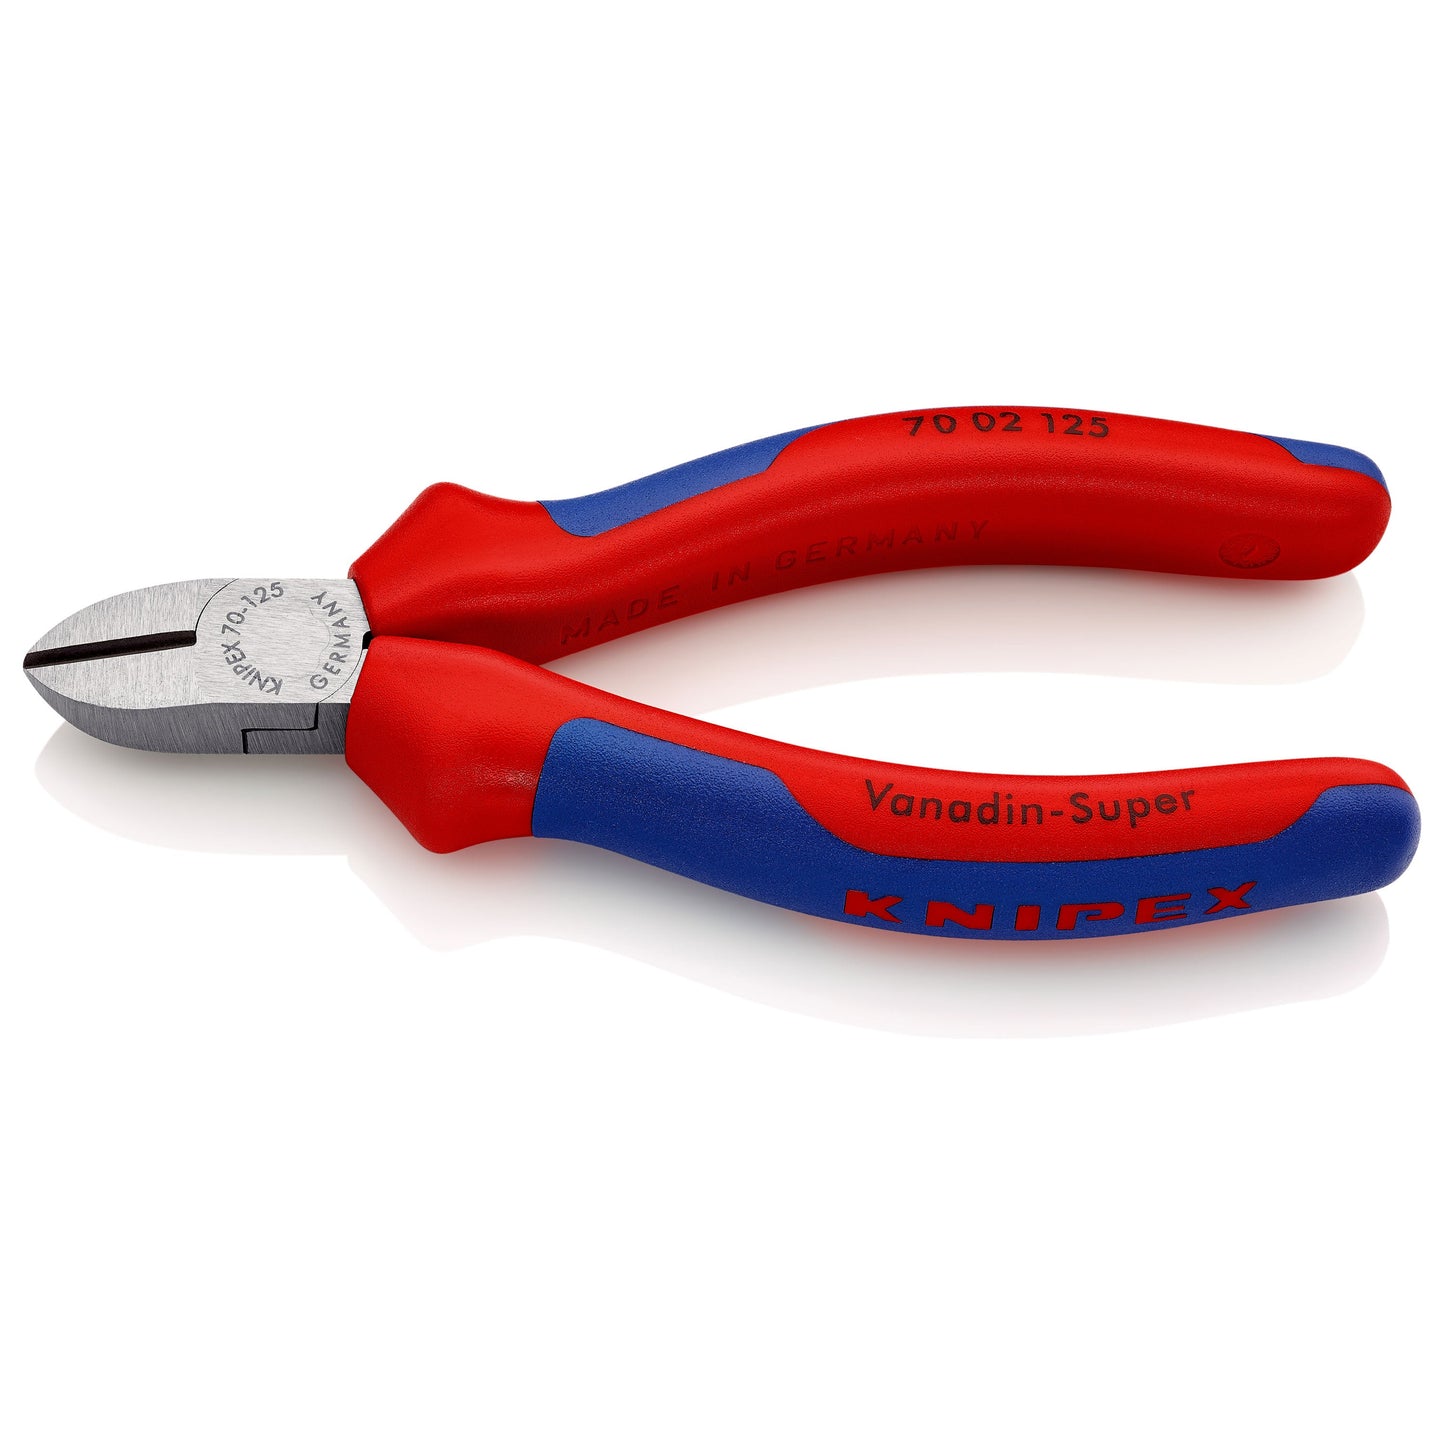 Knipex 70 02 125 - Diagonal cutting pliers 125 mm with two-component handles